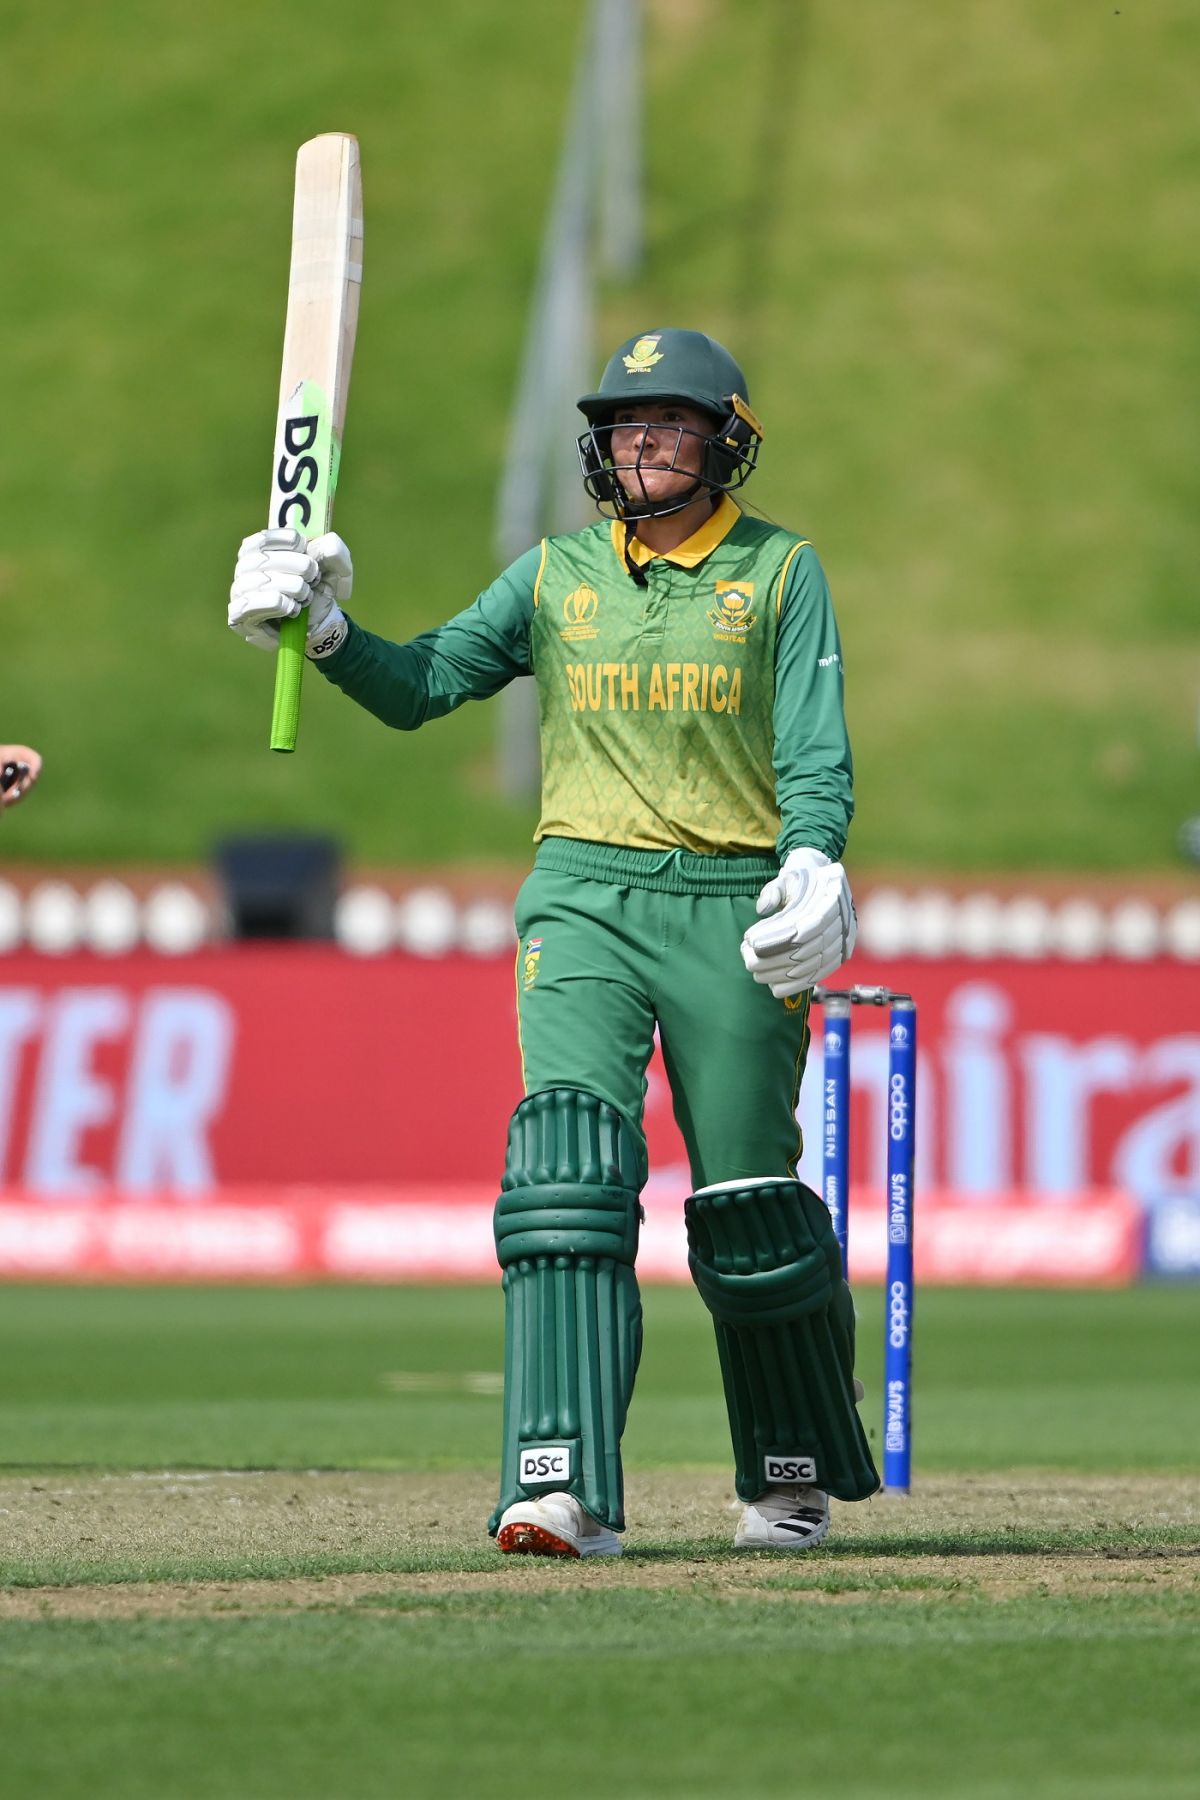 Women's World Cup: Sune Luus expresses happiness after South Africa seal semi-final spot